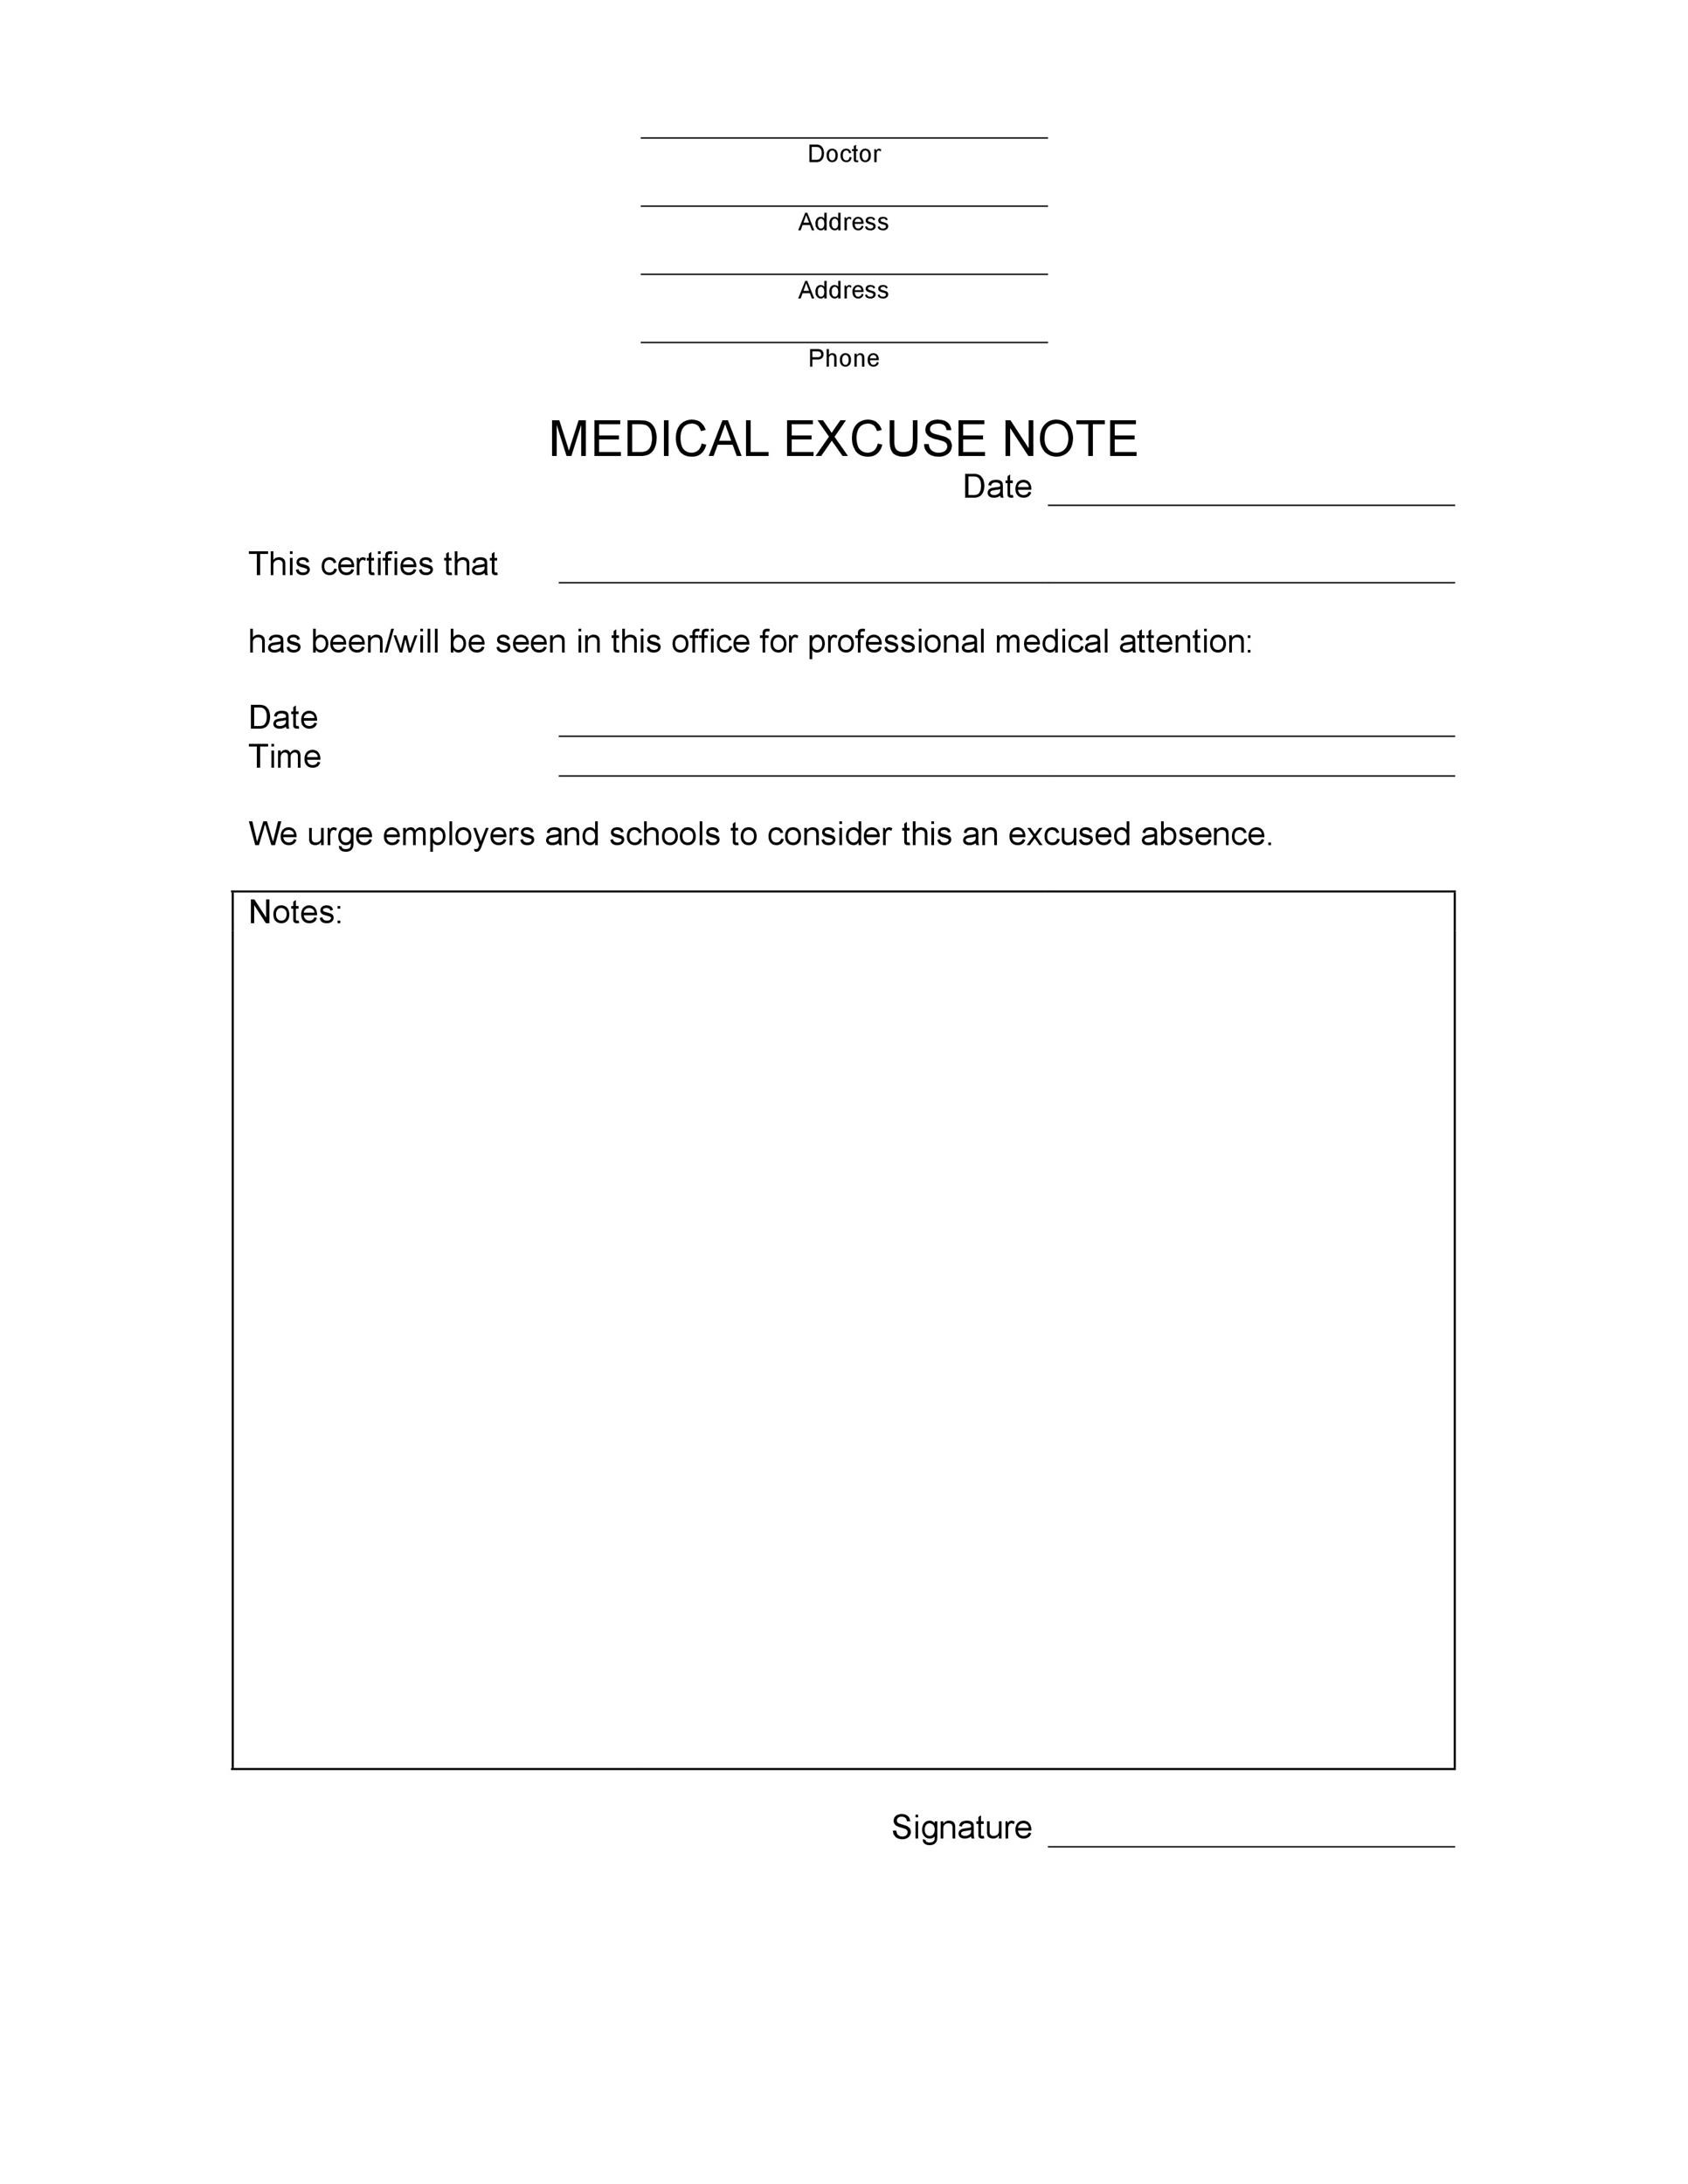 25  Free Doctor Note / Excuse Templates ᐅ TemplateLab